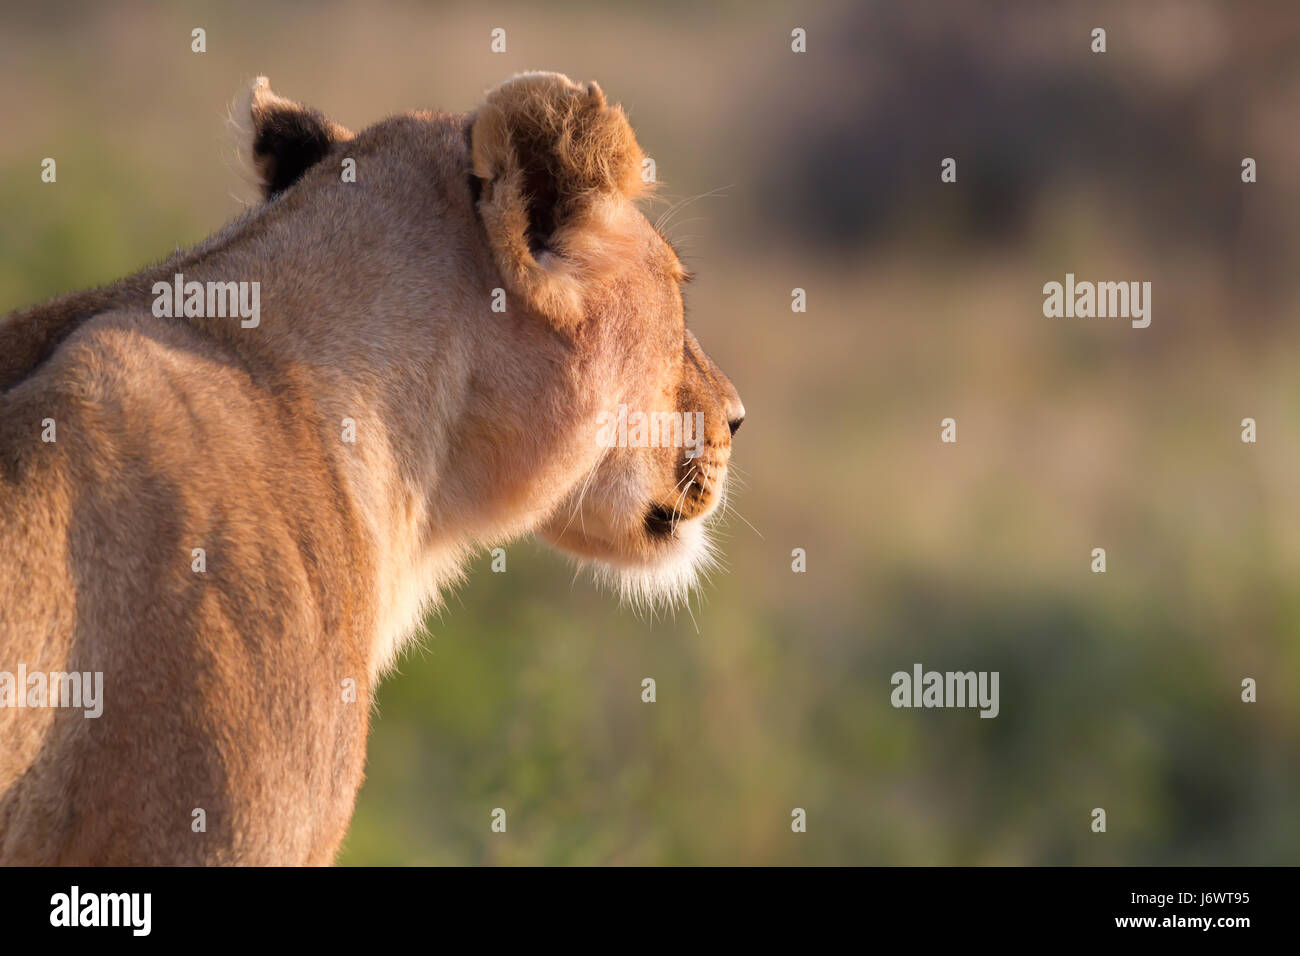 lion in the steppe Stock Photo